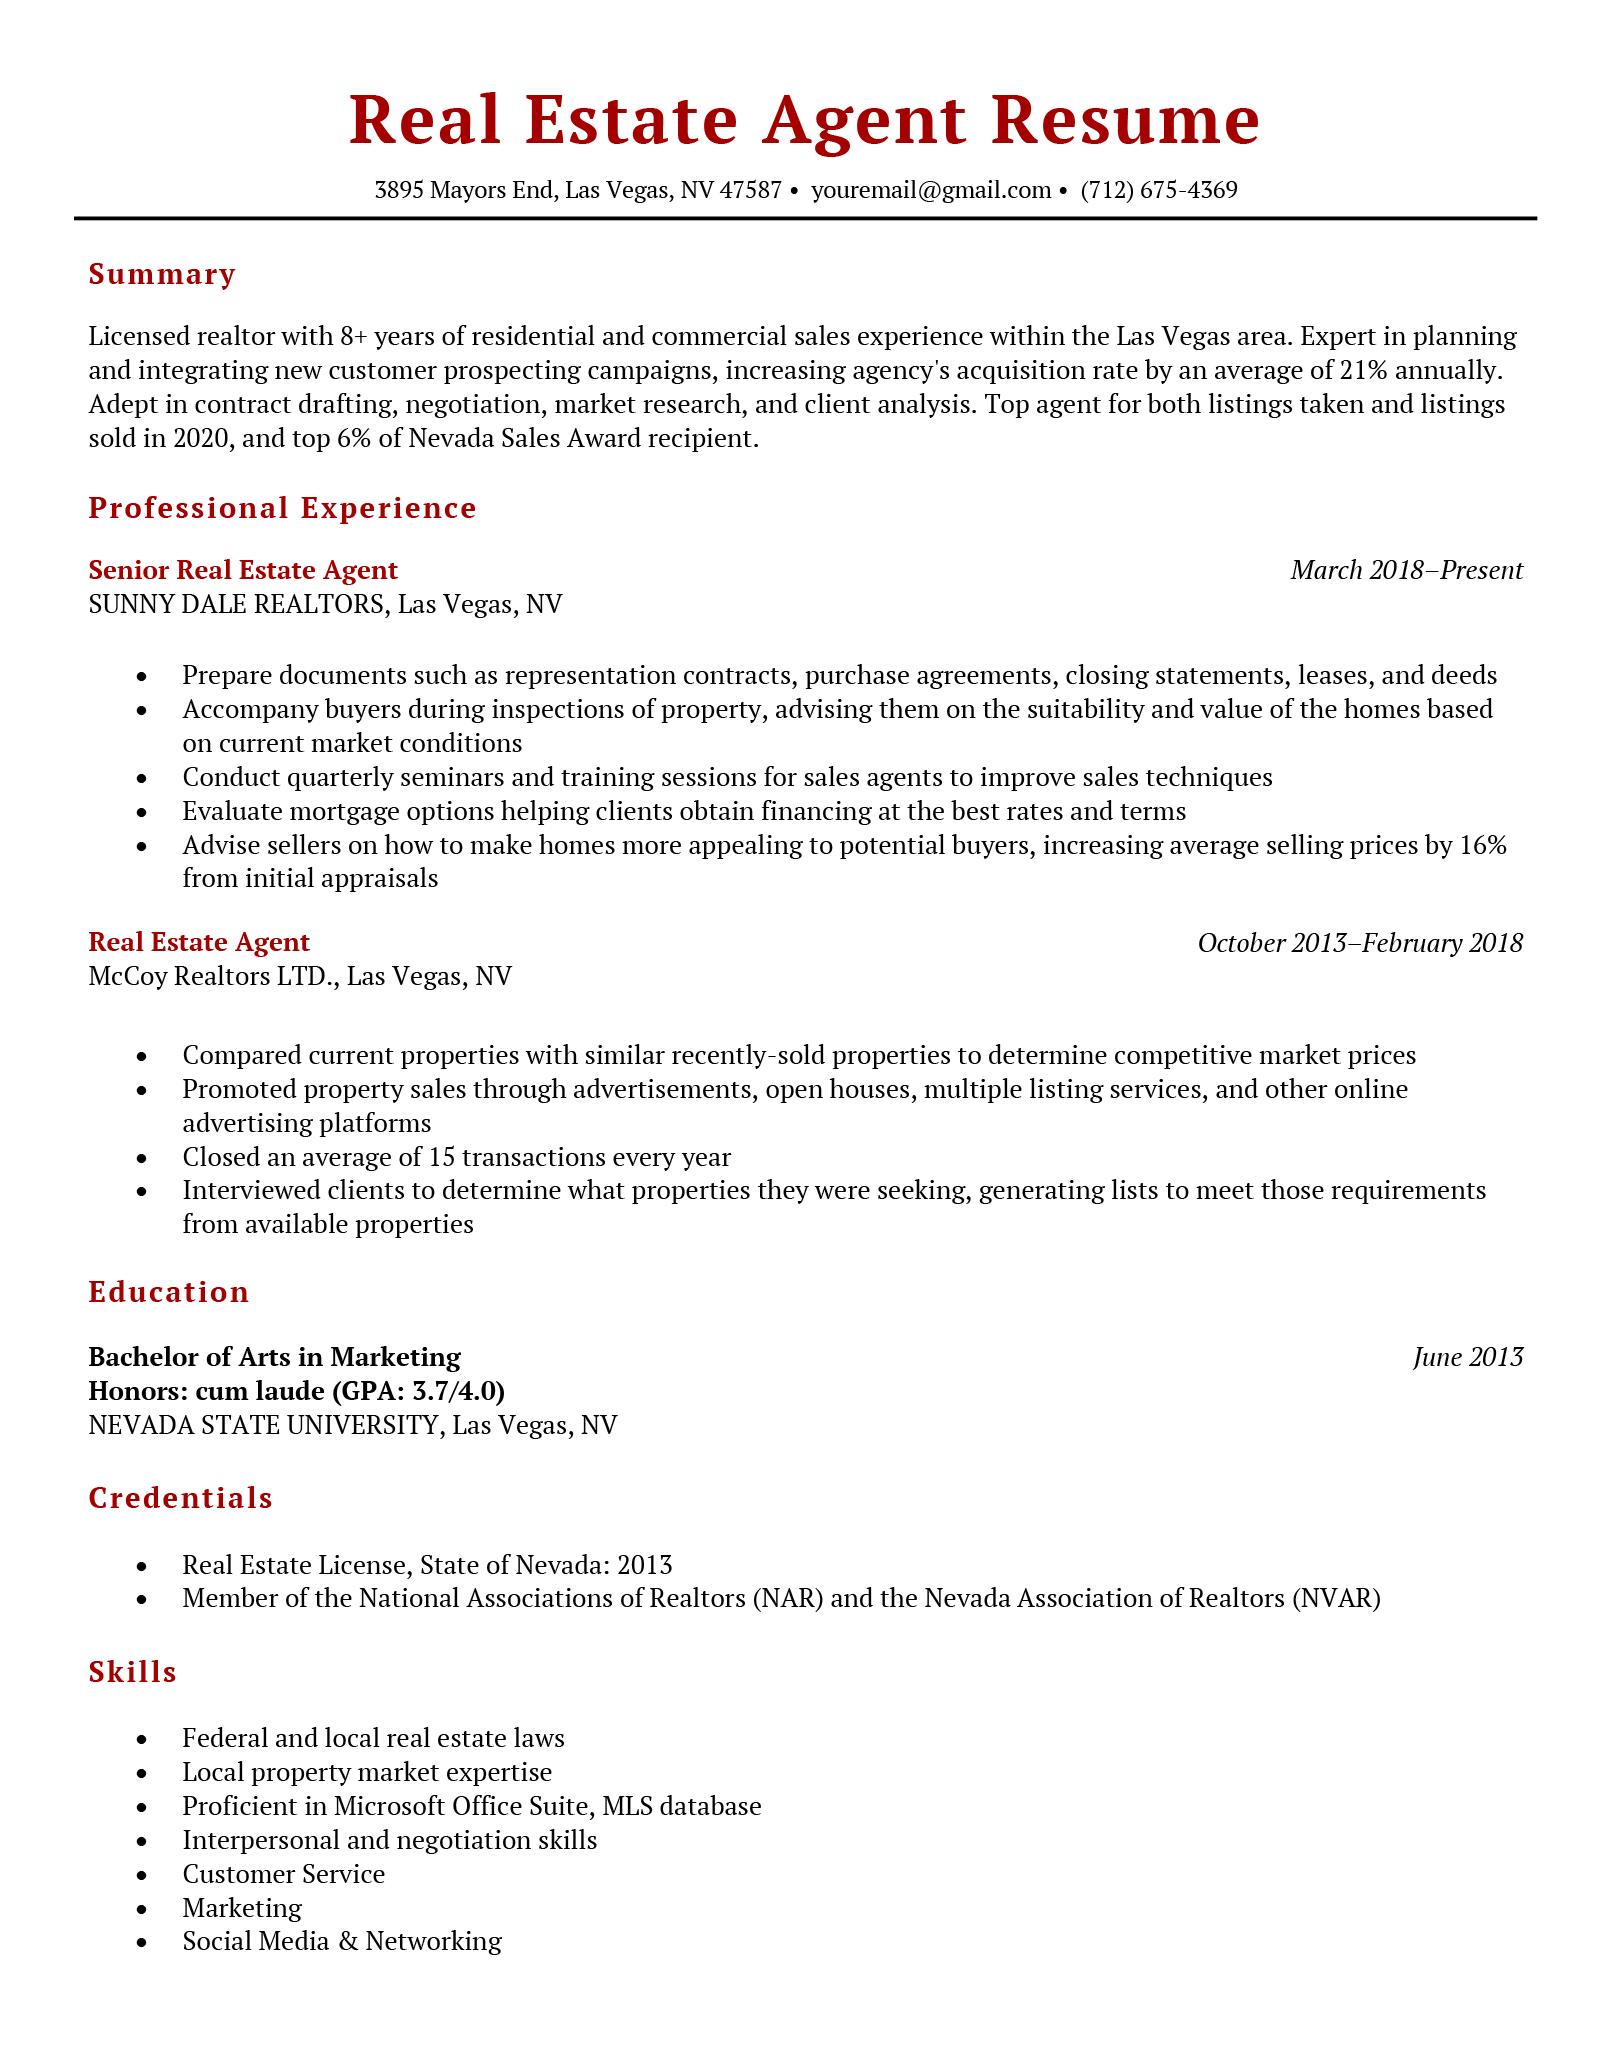 An example of a real estate agent resume